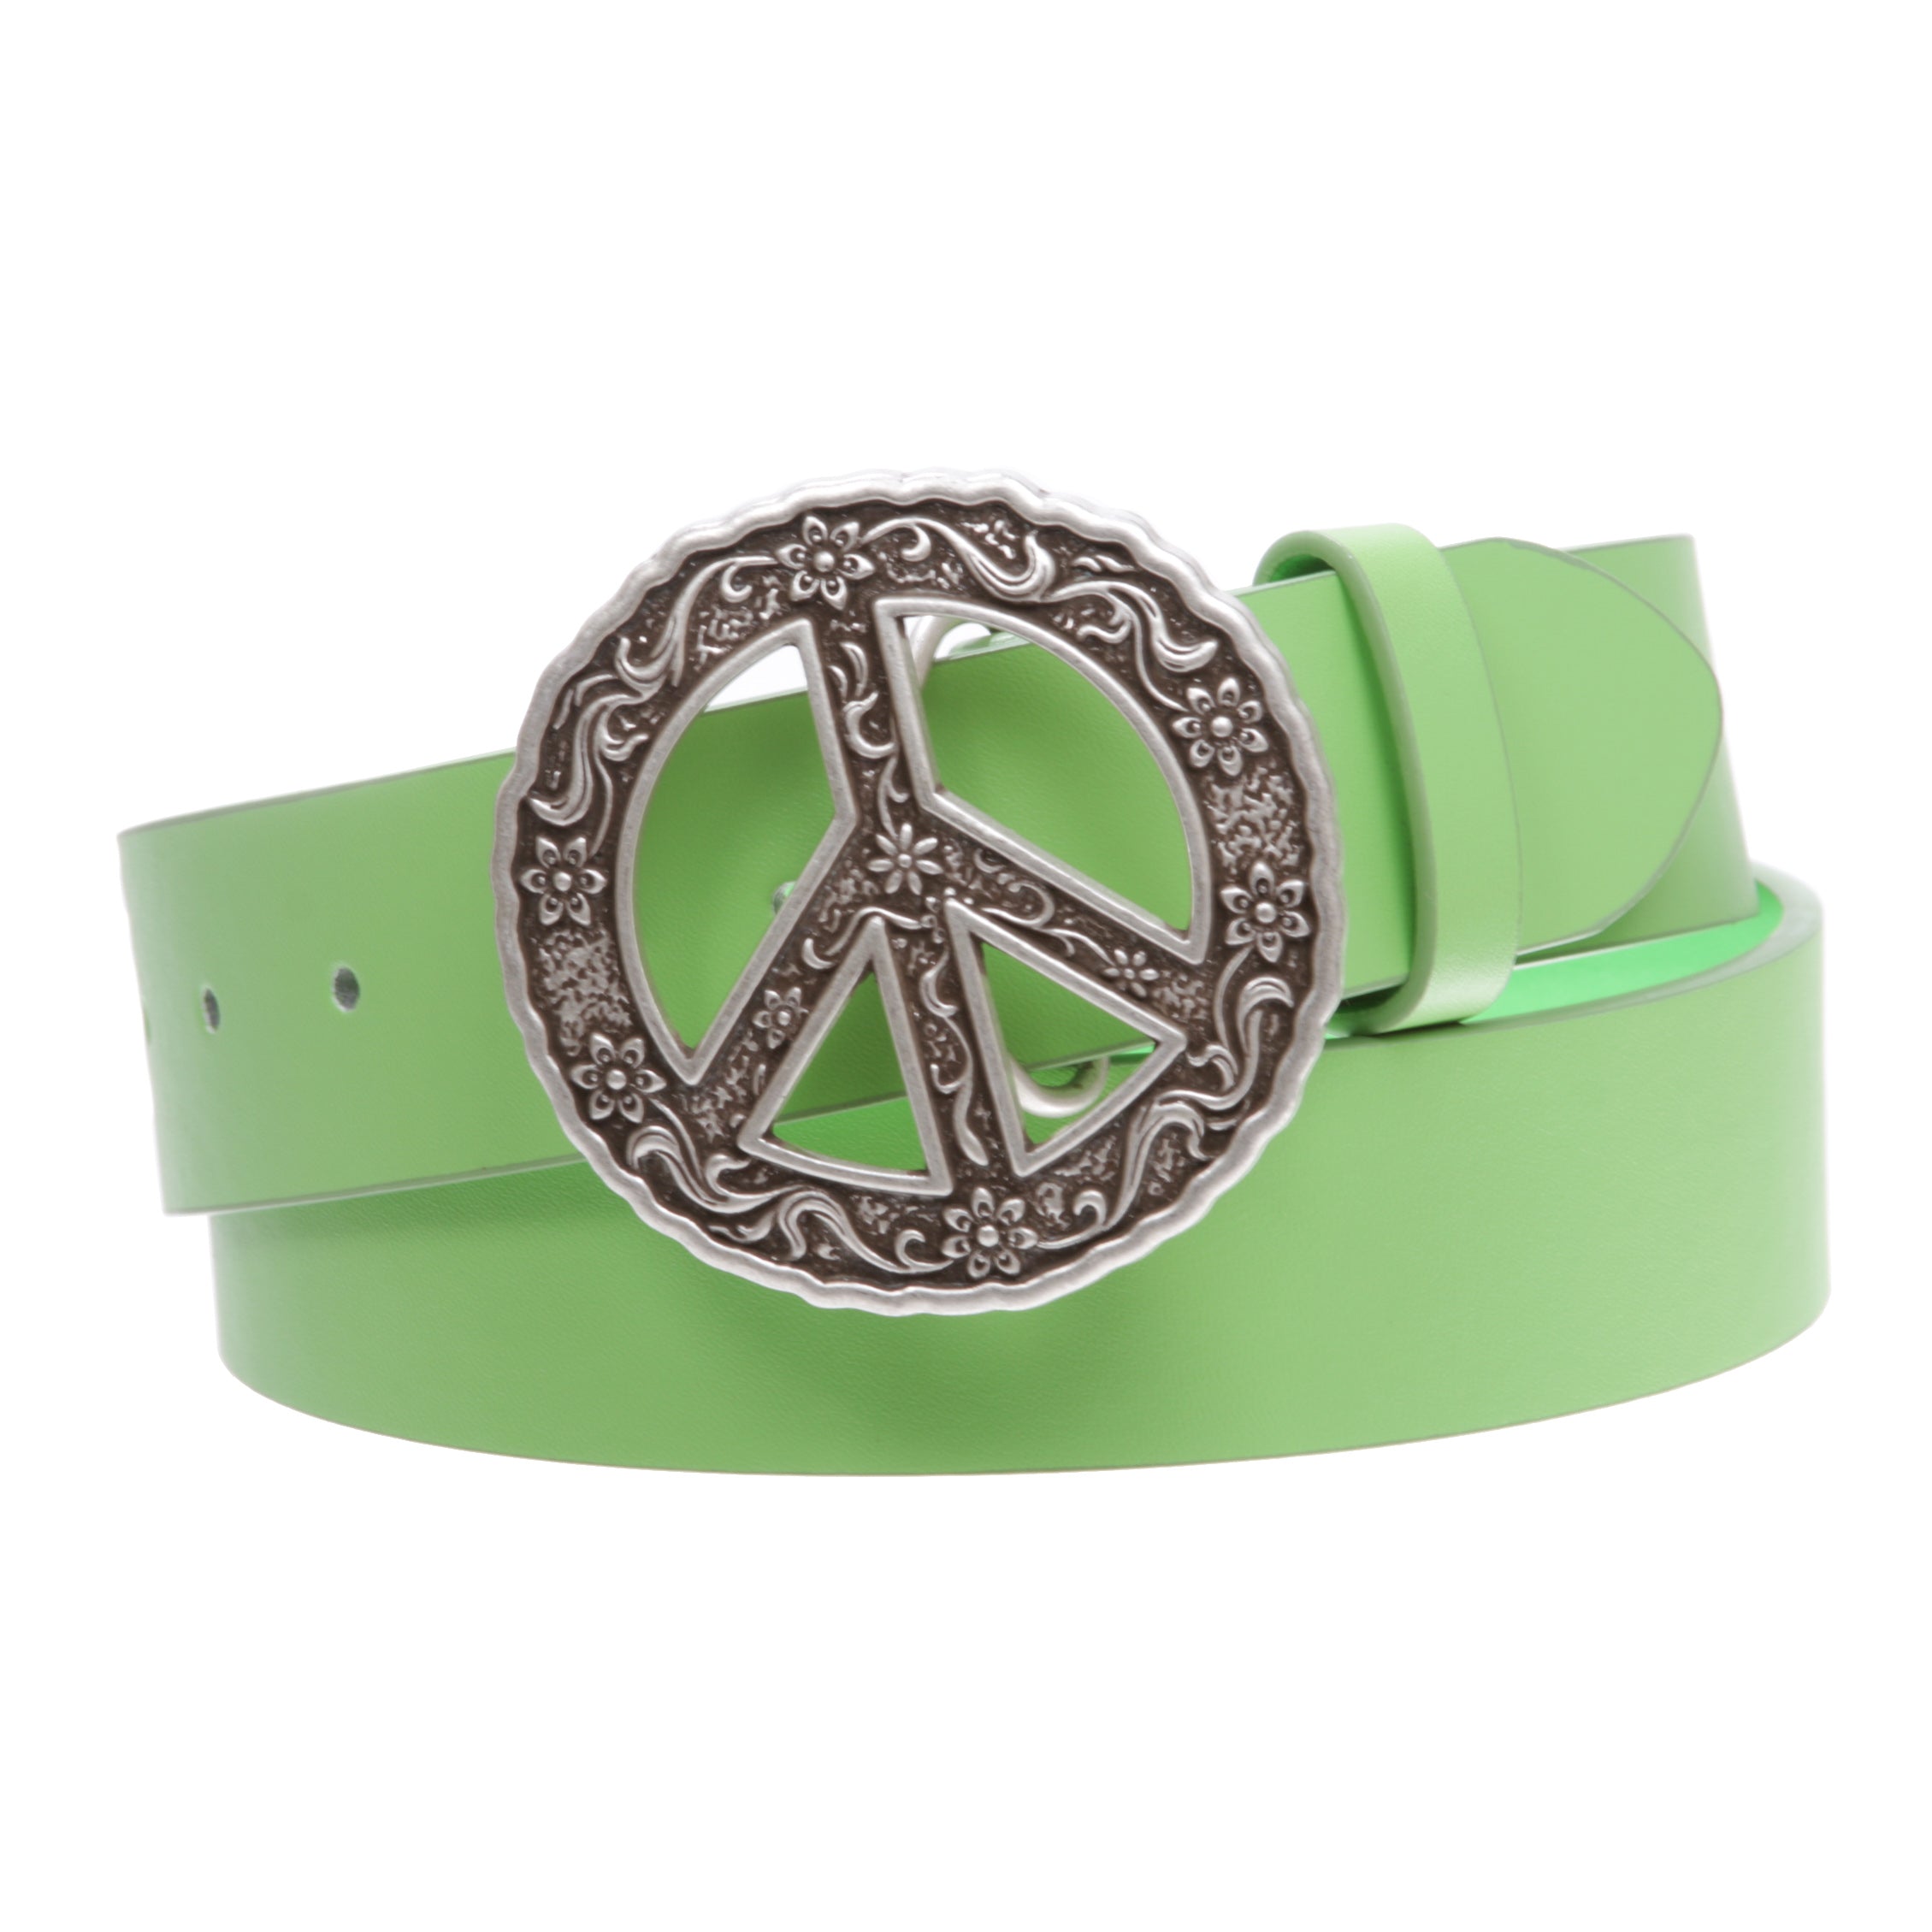 1 1/2" Snap On Belt With Round Perforated Floral Engraving Peace Sign Belt Buckle